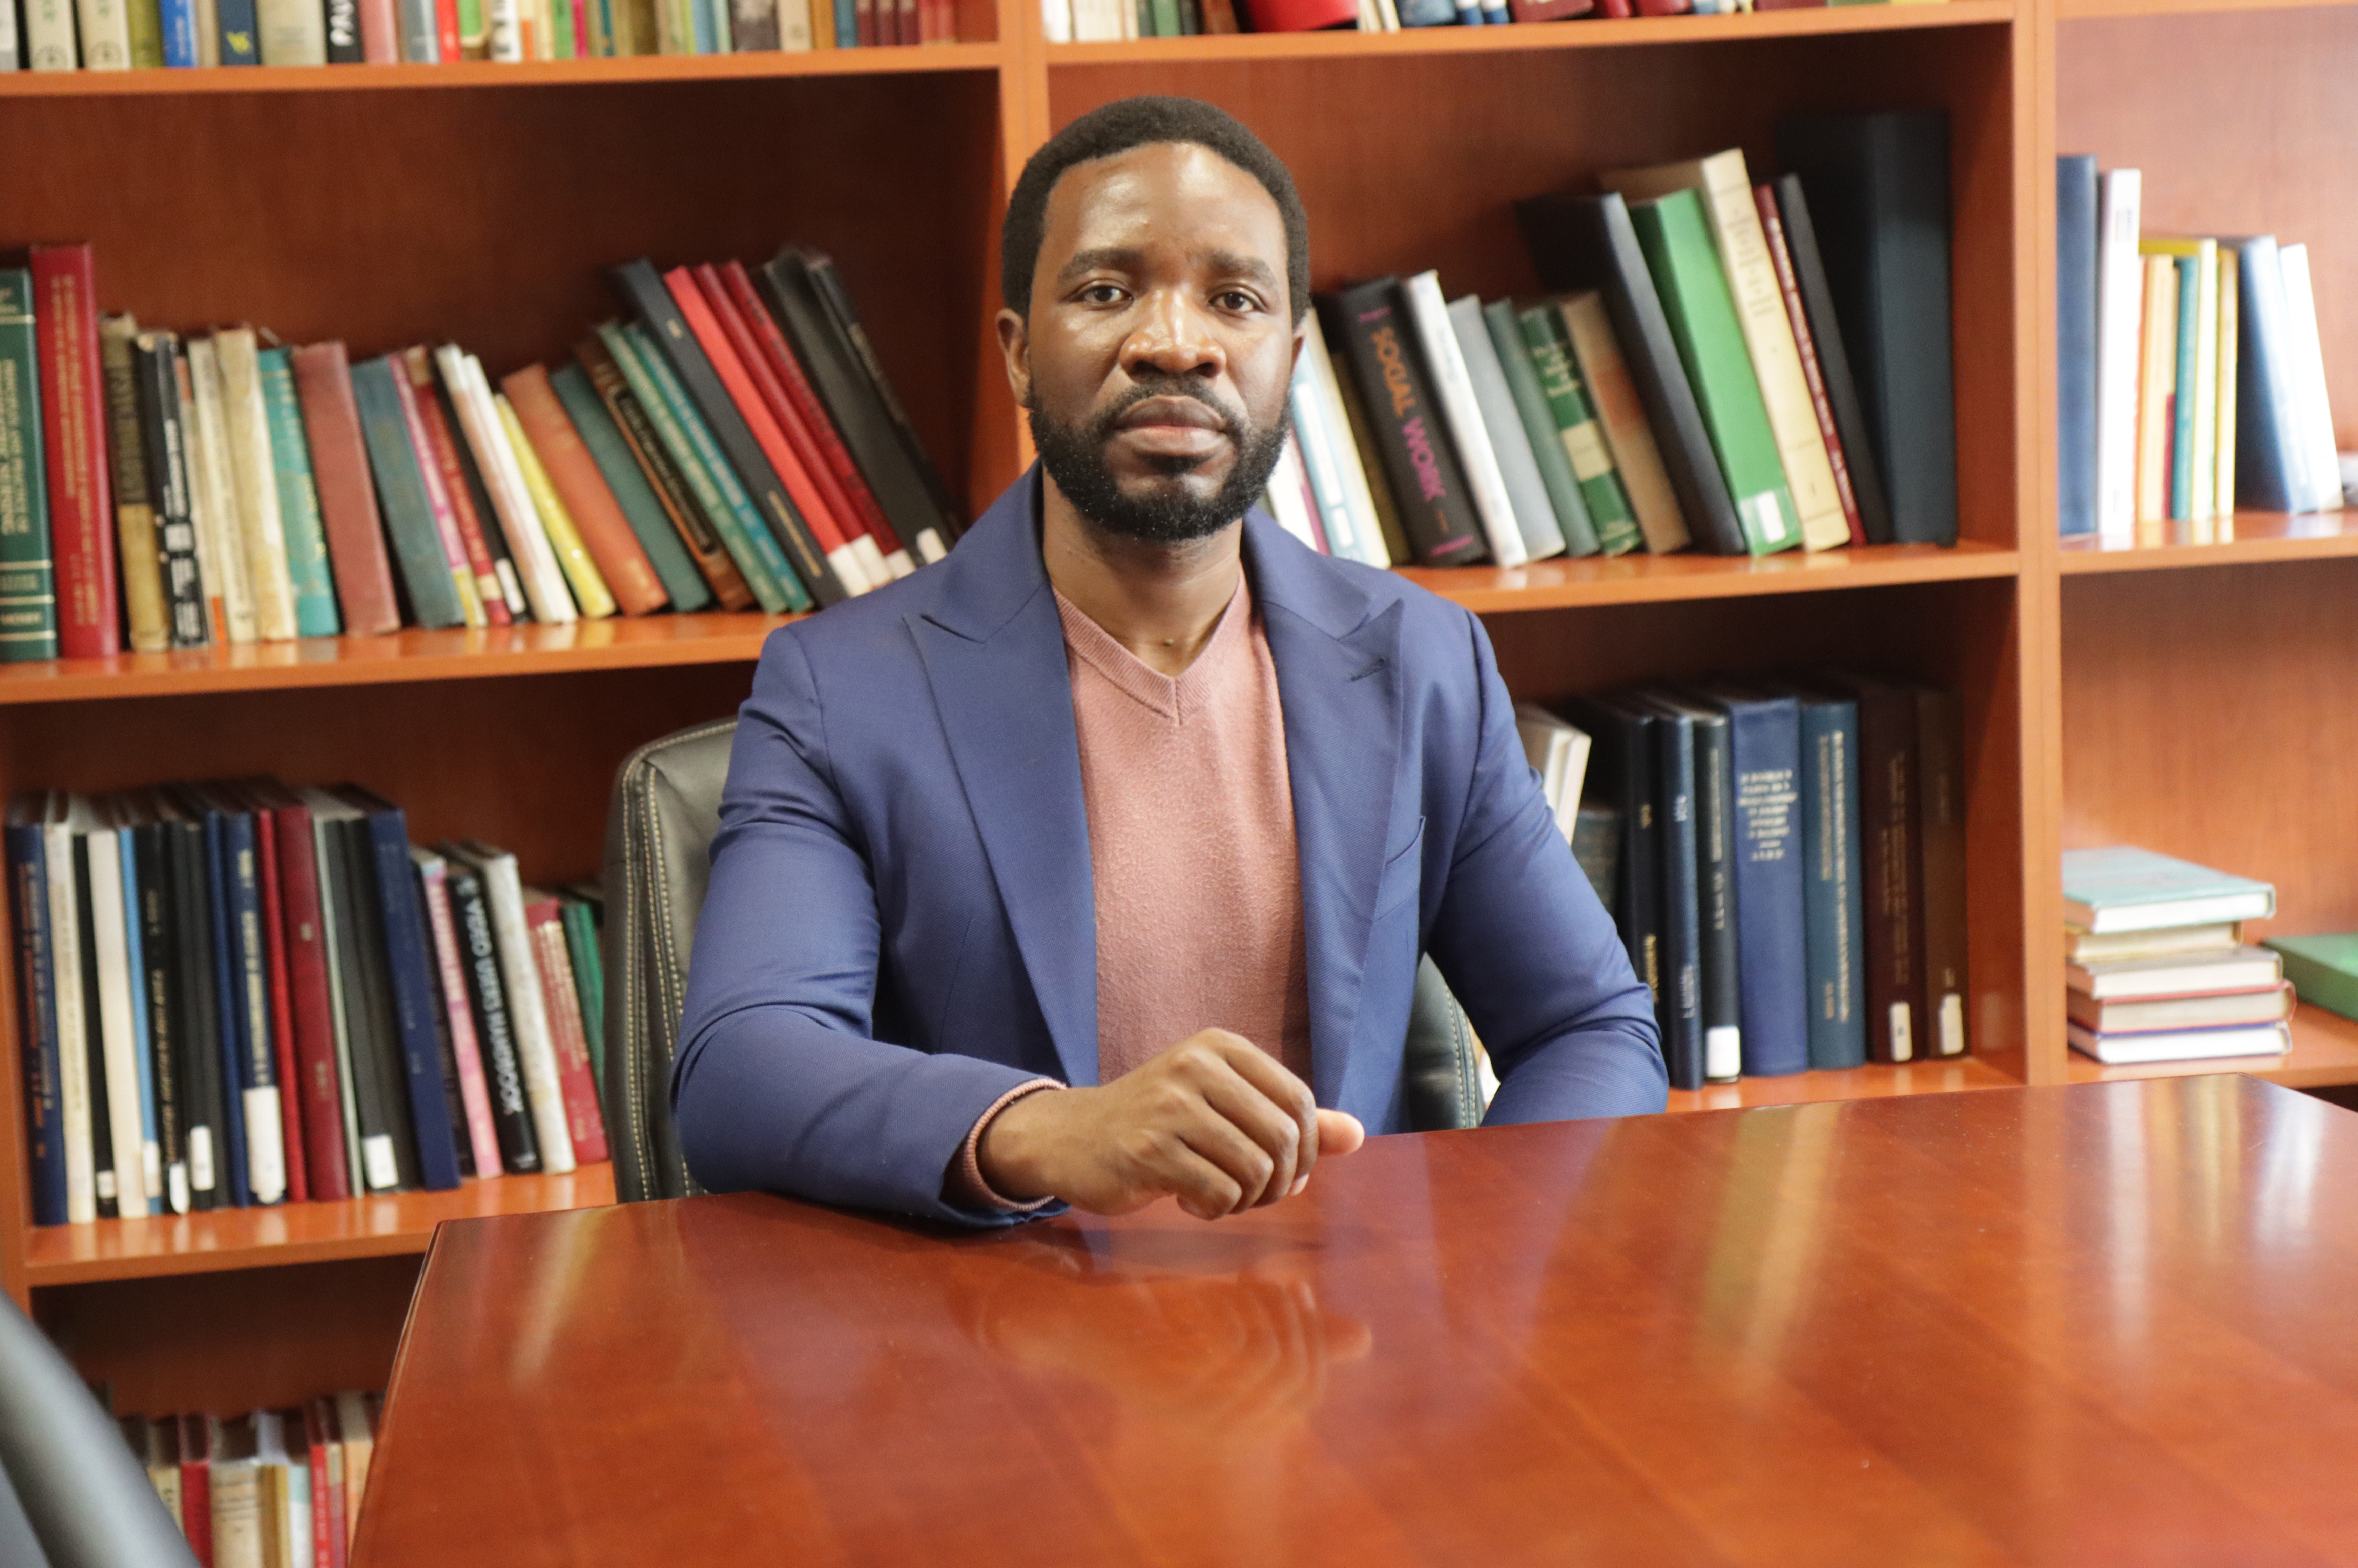 Prof Mpumelelo read more